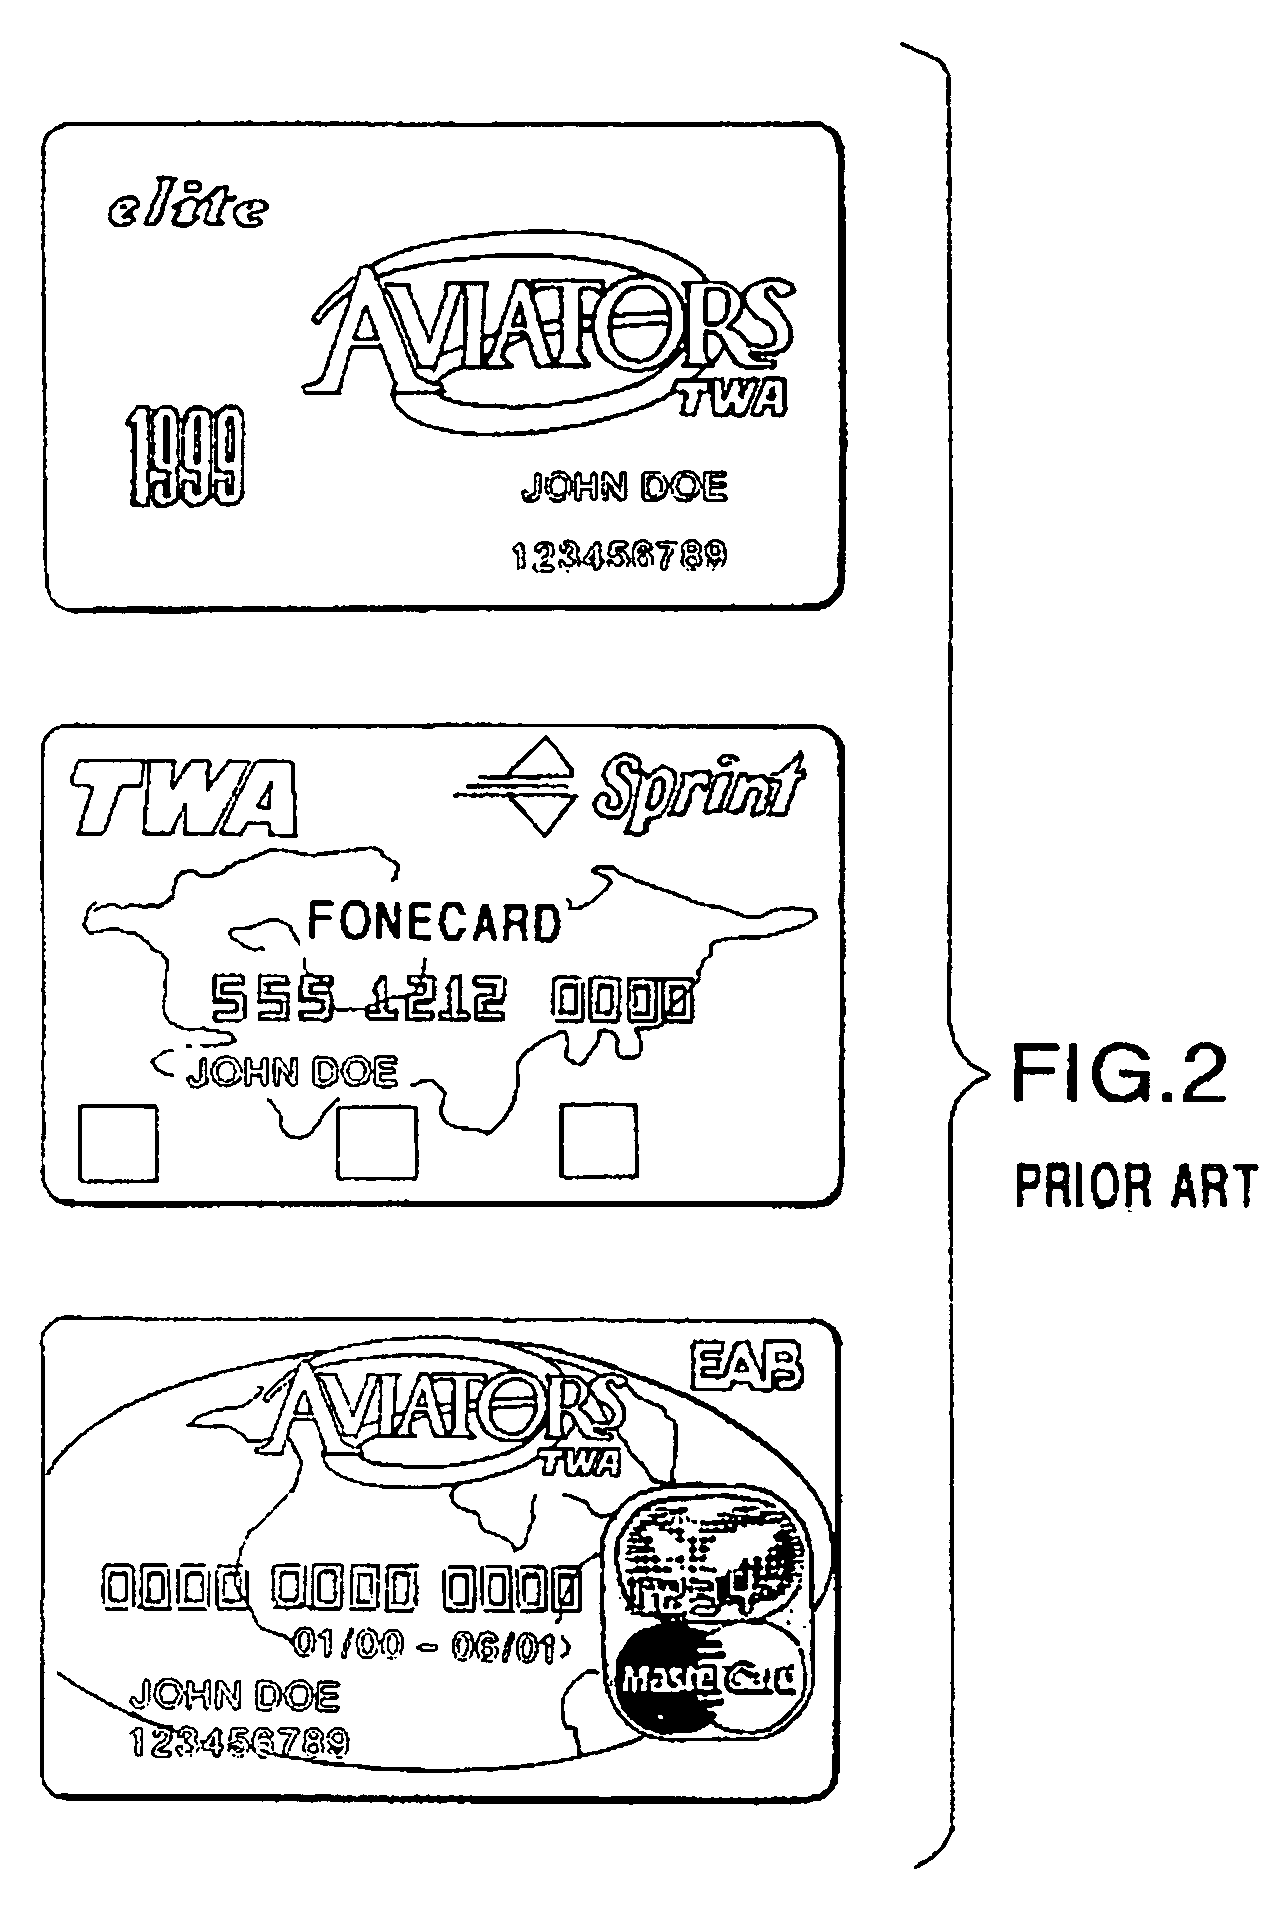 Method and system for issuing, aggregating and redeeming merchant rewards with an issuing bank